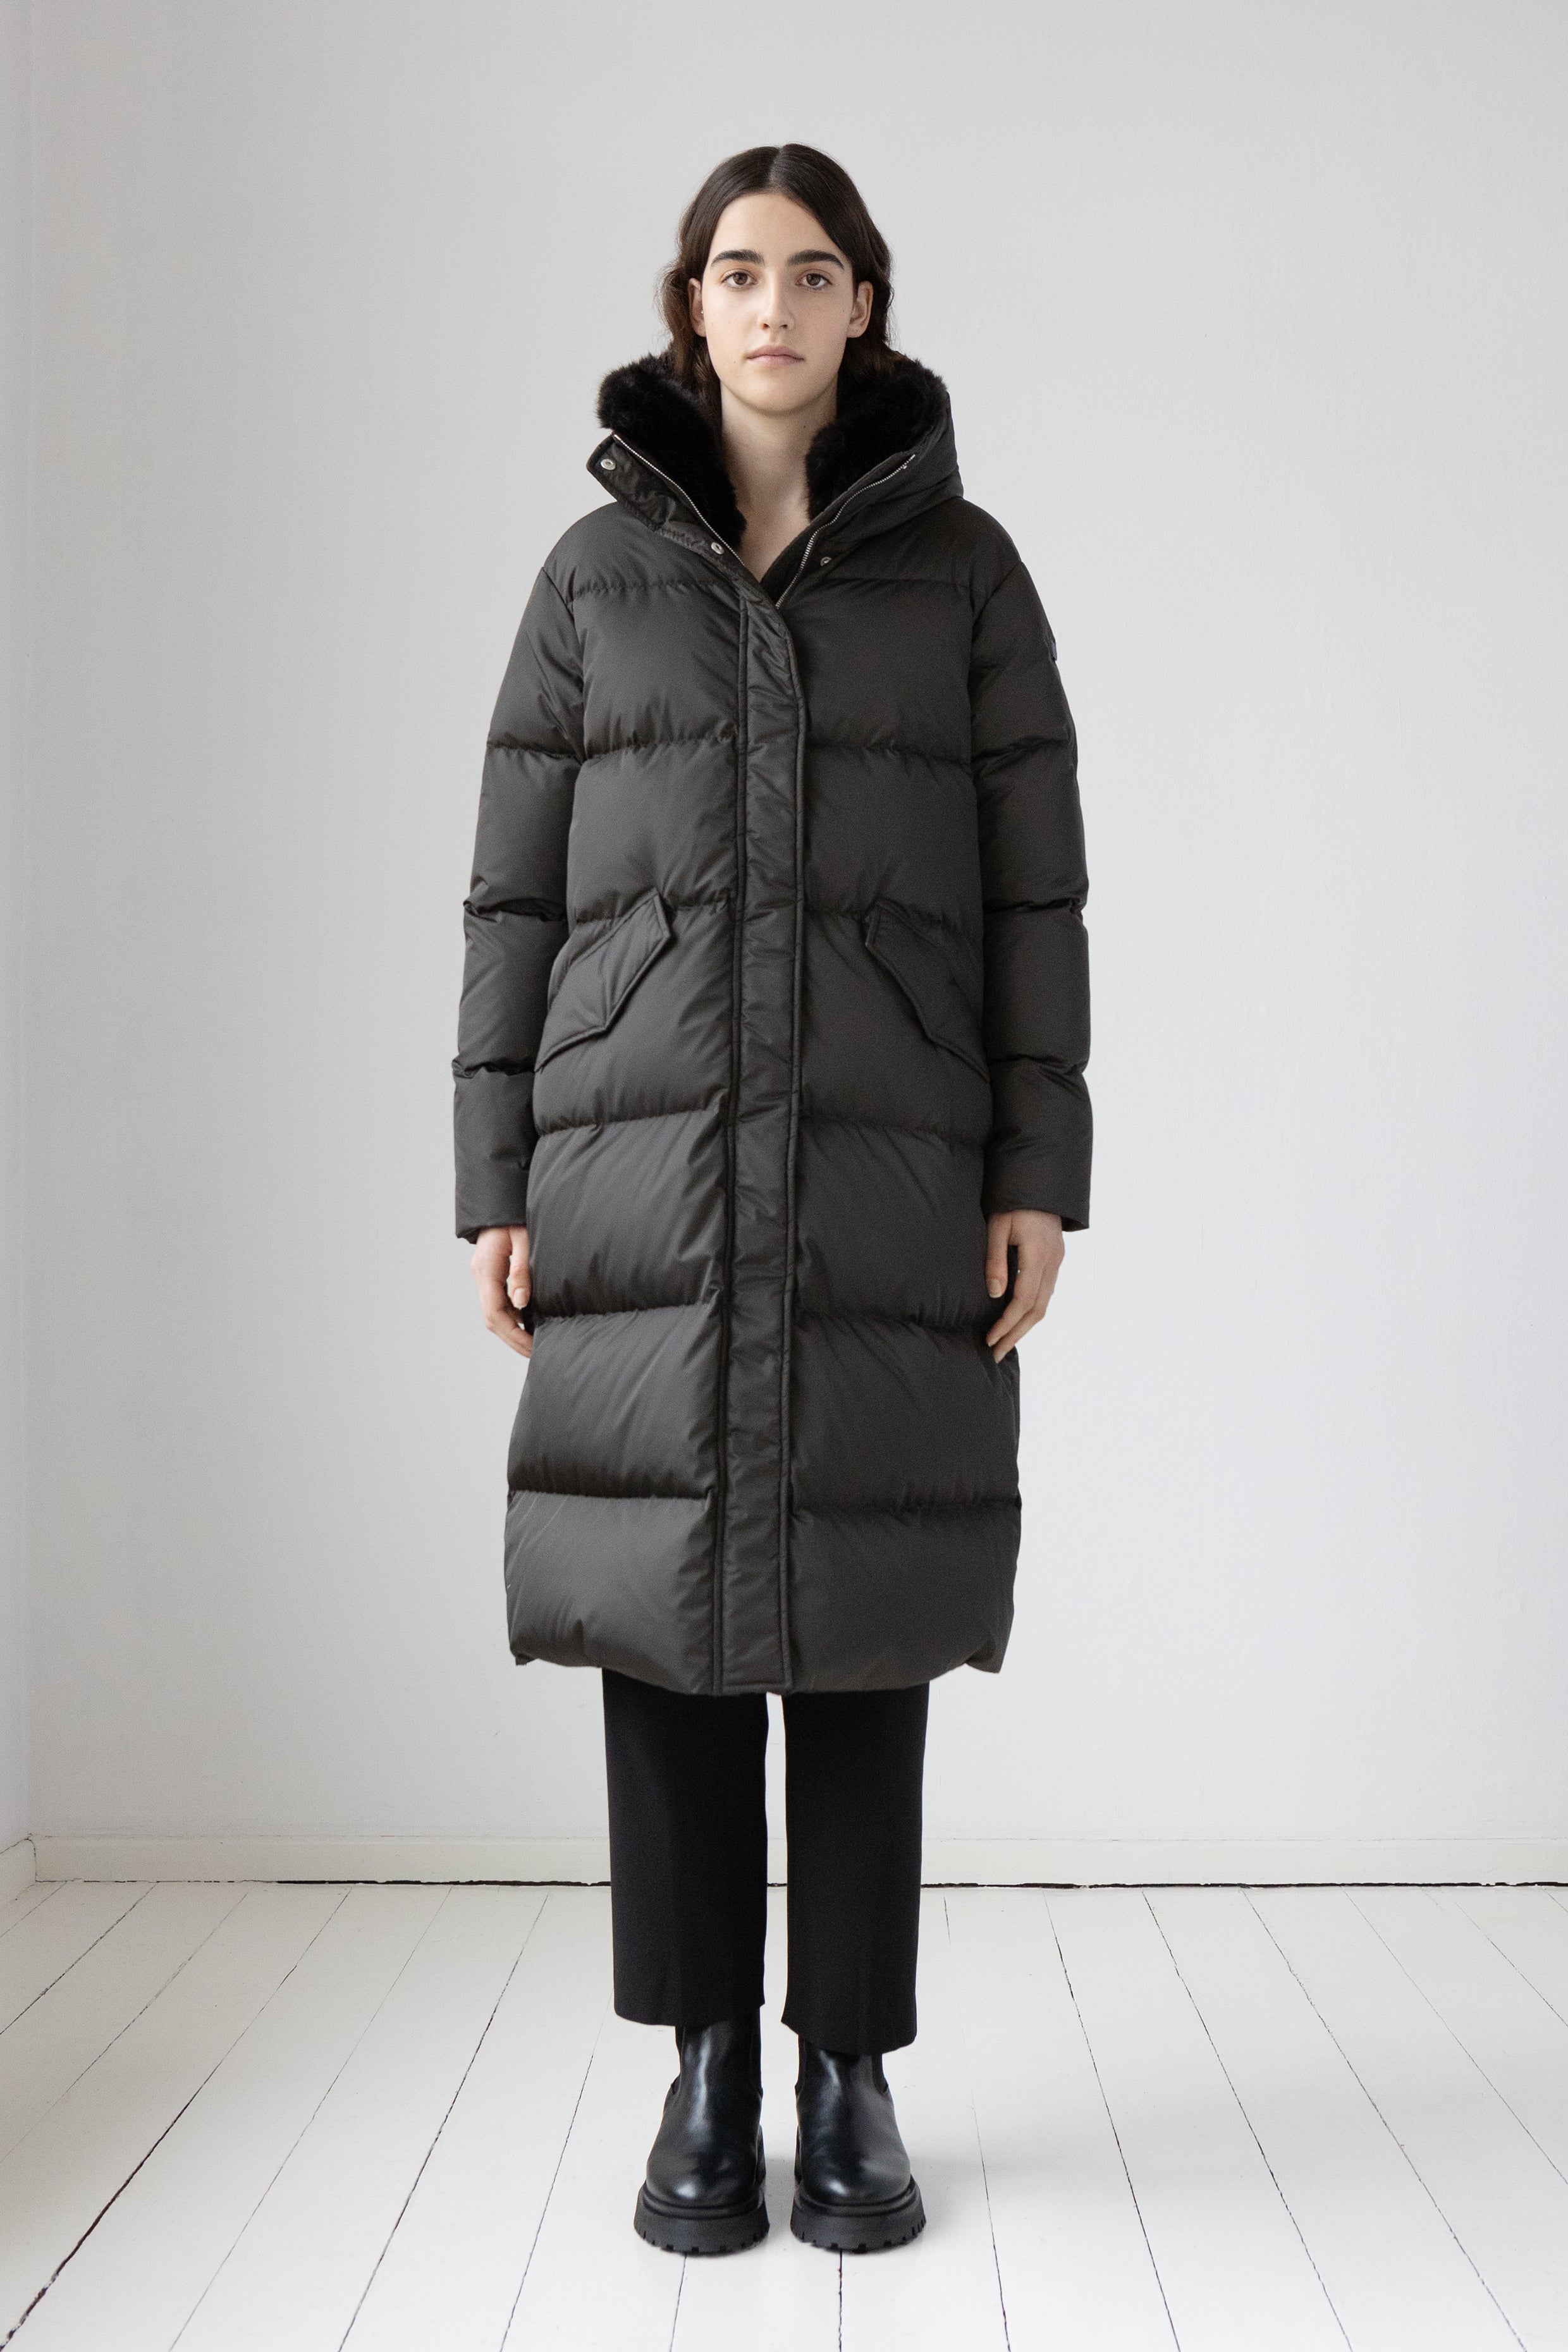 Long Lempelius Downcoat with a slim silhouette